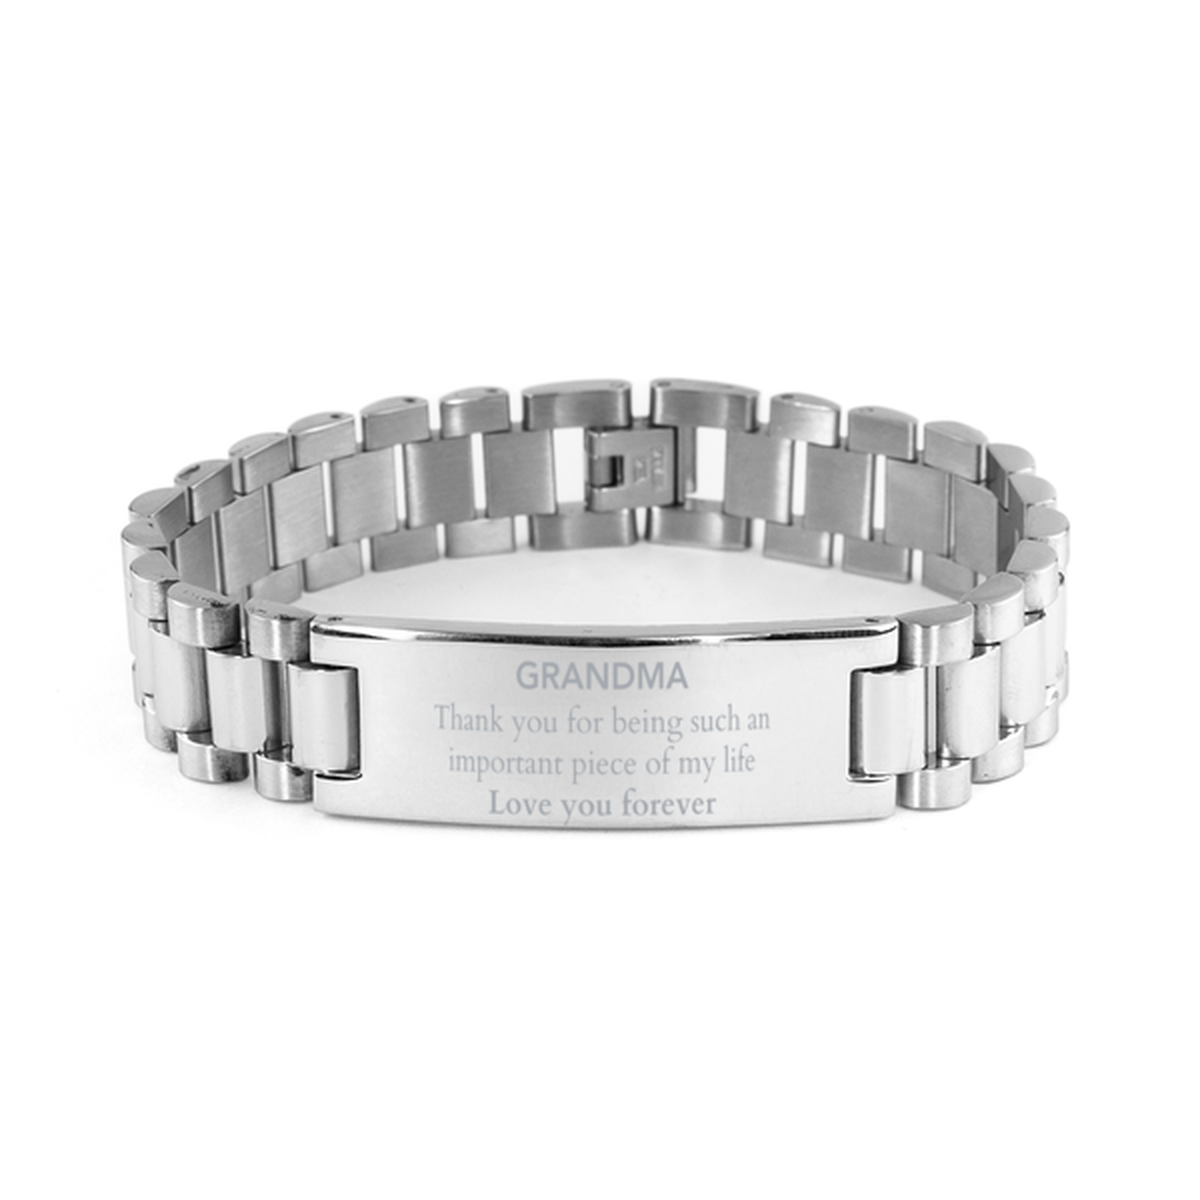 Appropriate Grandma Ladder Stainless Steel Bracelet Epic Birthday Gifts for Grandma Thank you for being such an important piece of my life Grandma Christmas Mothers Fathers Day